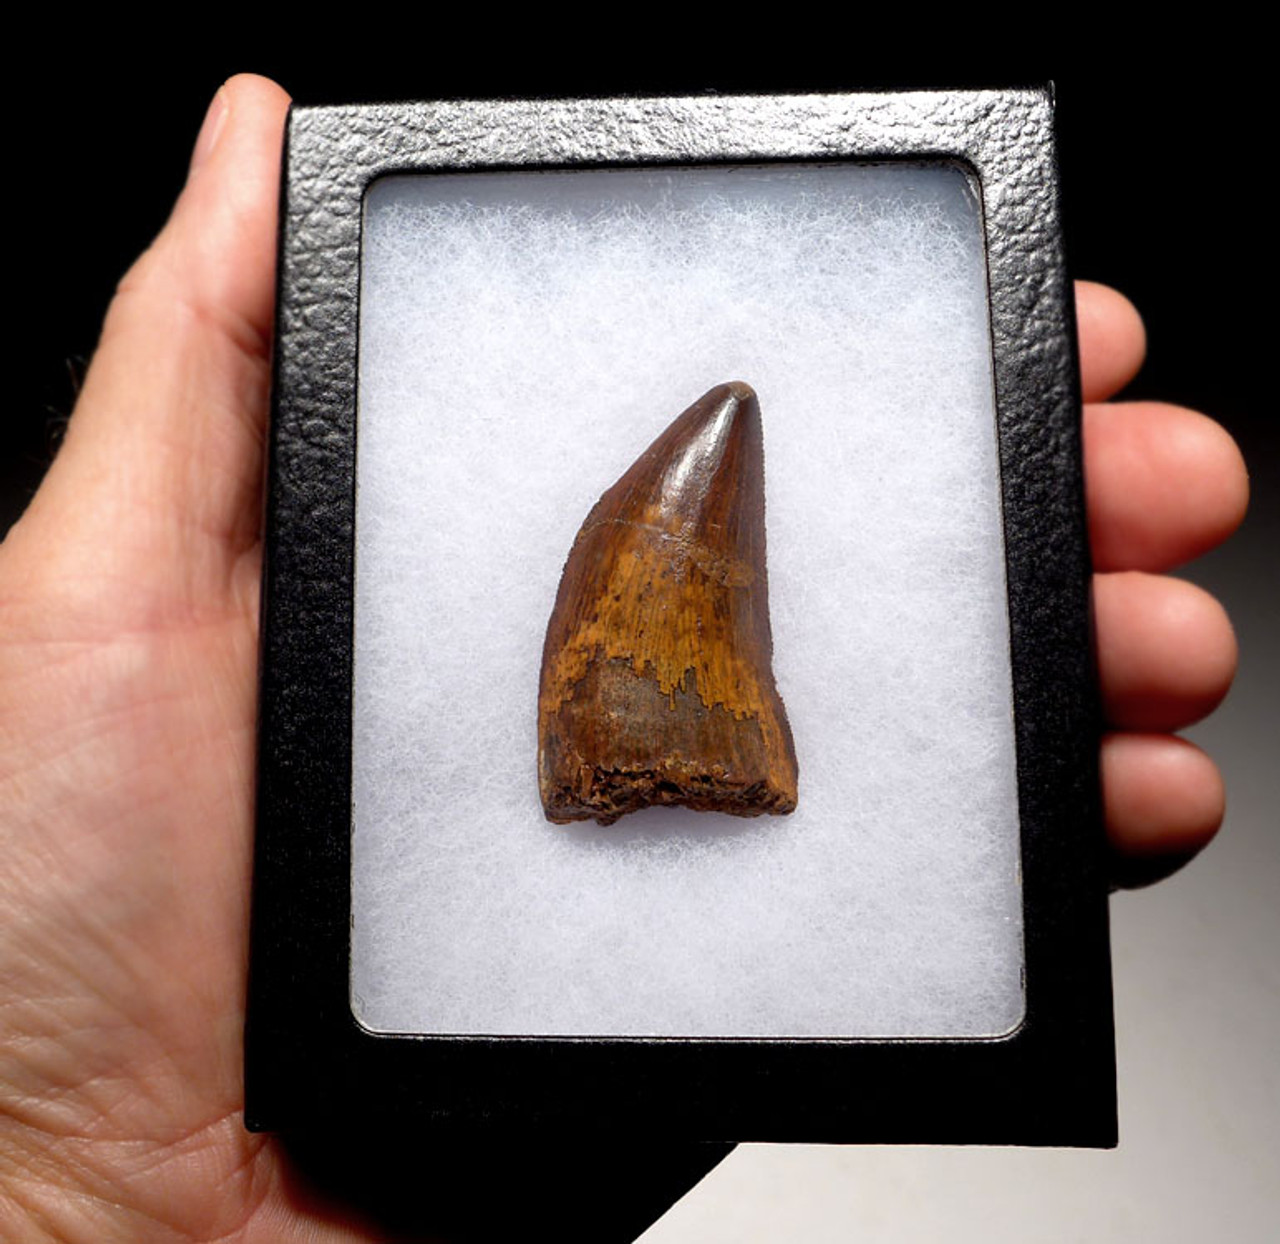 DT2-071 - CHOICE QUALITY 2.15 INCH CARCHARODONTOSAURUS FOSSIL TOOTH FROM THE LARGEST MEAT-EATING DINOSAUR